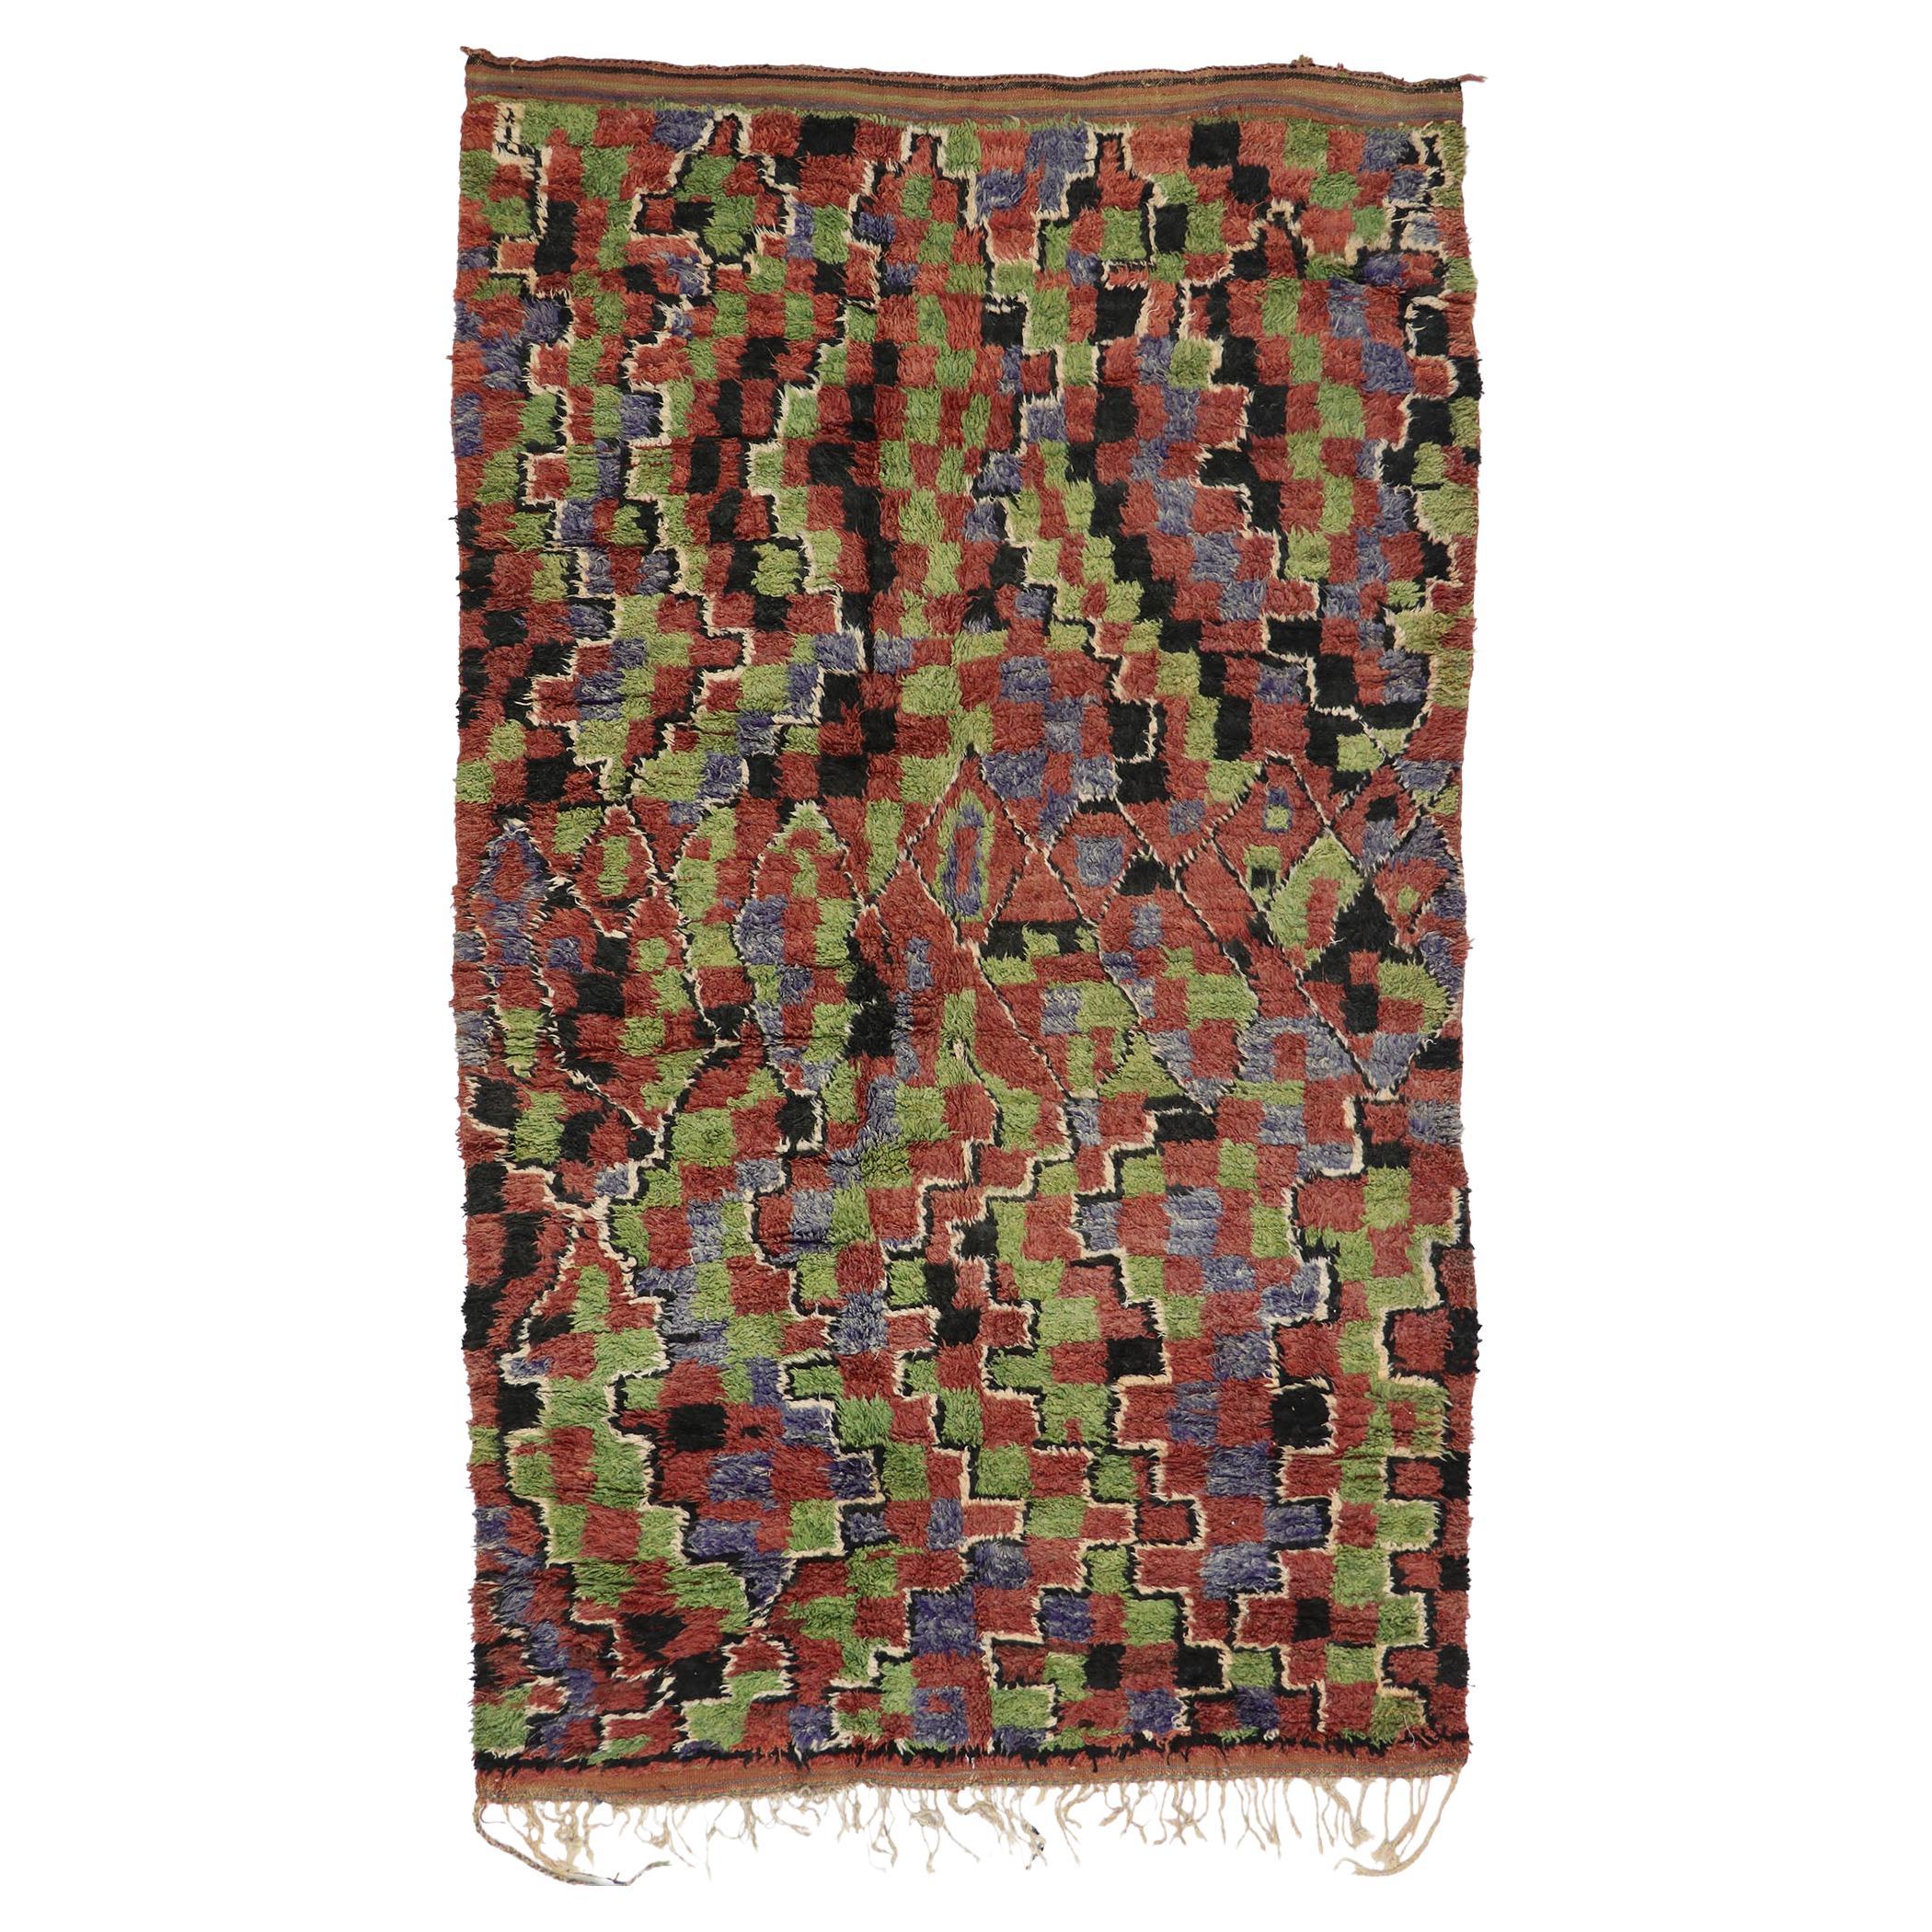 Vintage Berber Moroccan Rug, Rustic Charm Meets Abstract Expressionism